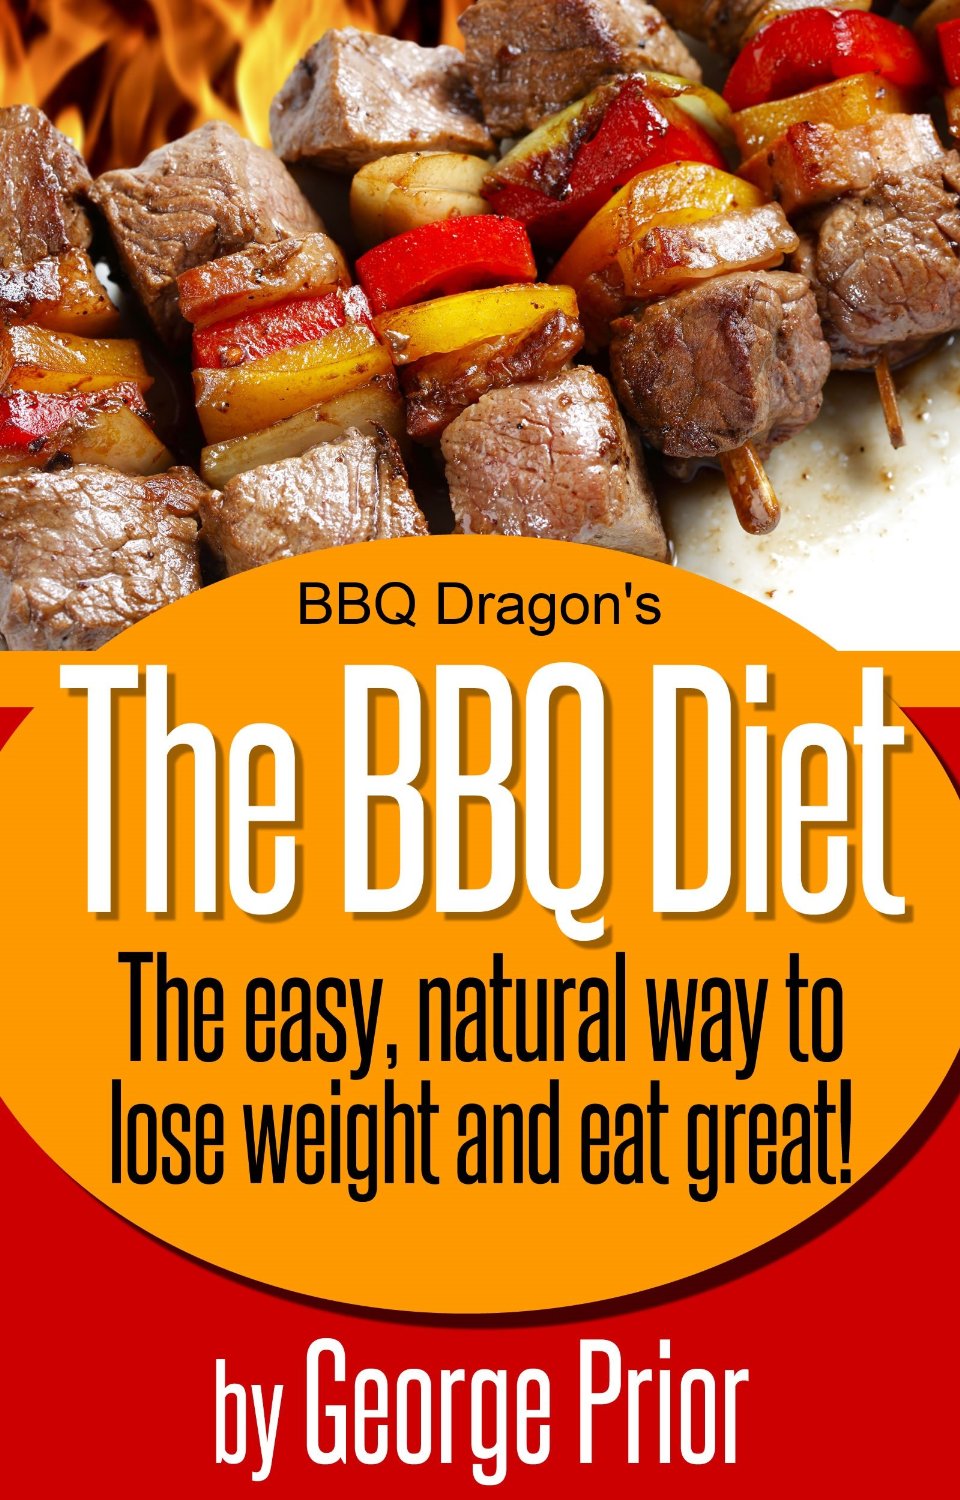 The BBQ Diet by George Prior